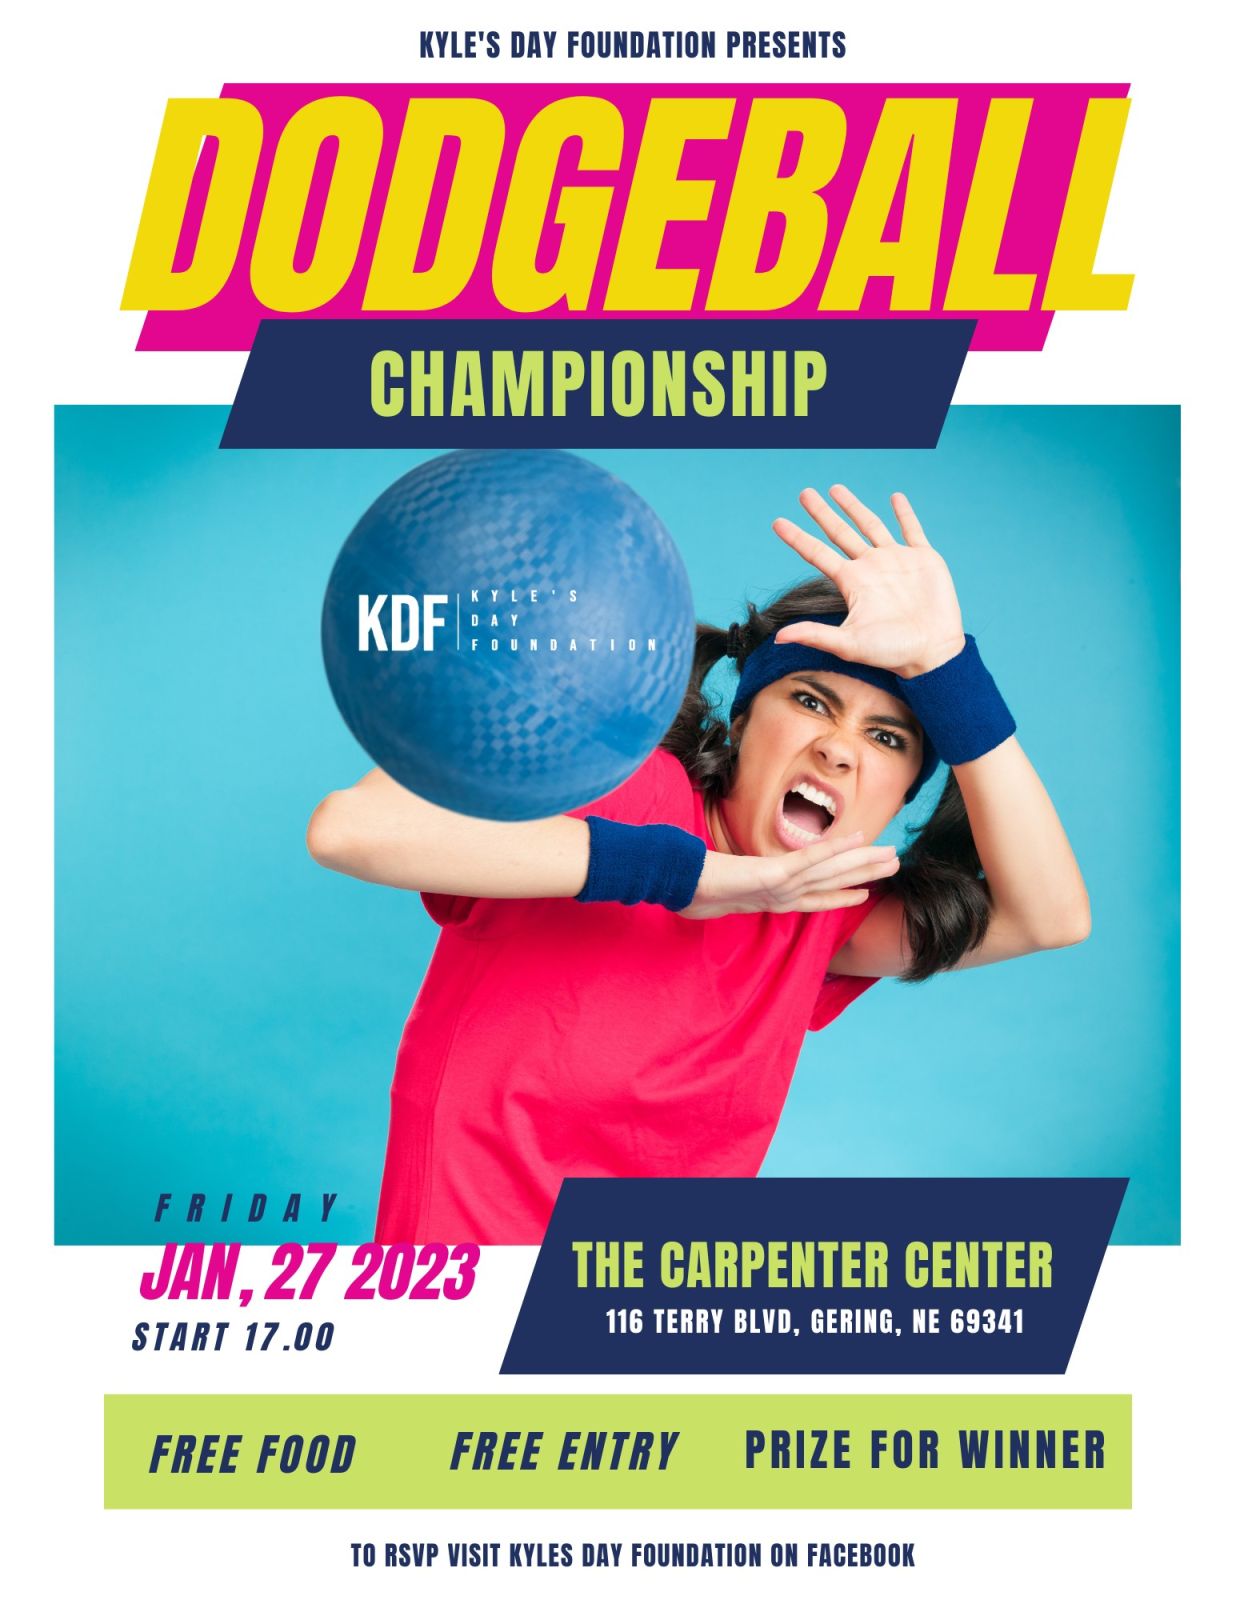 Event Promo Photo For Dodgeball!